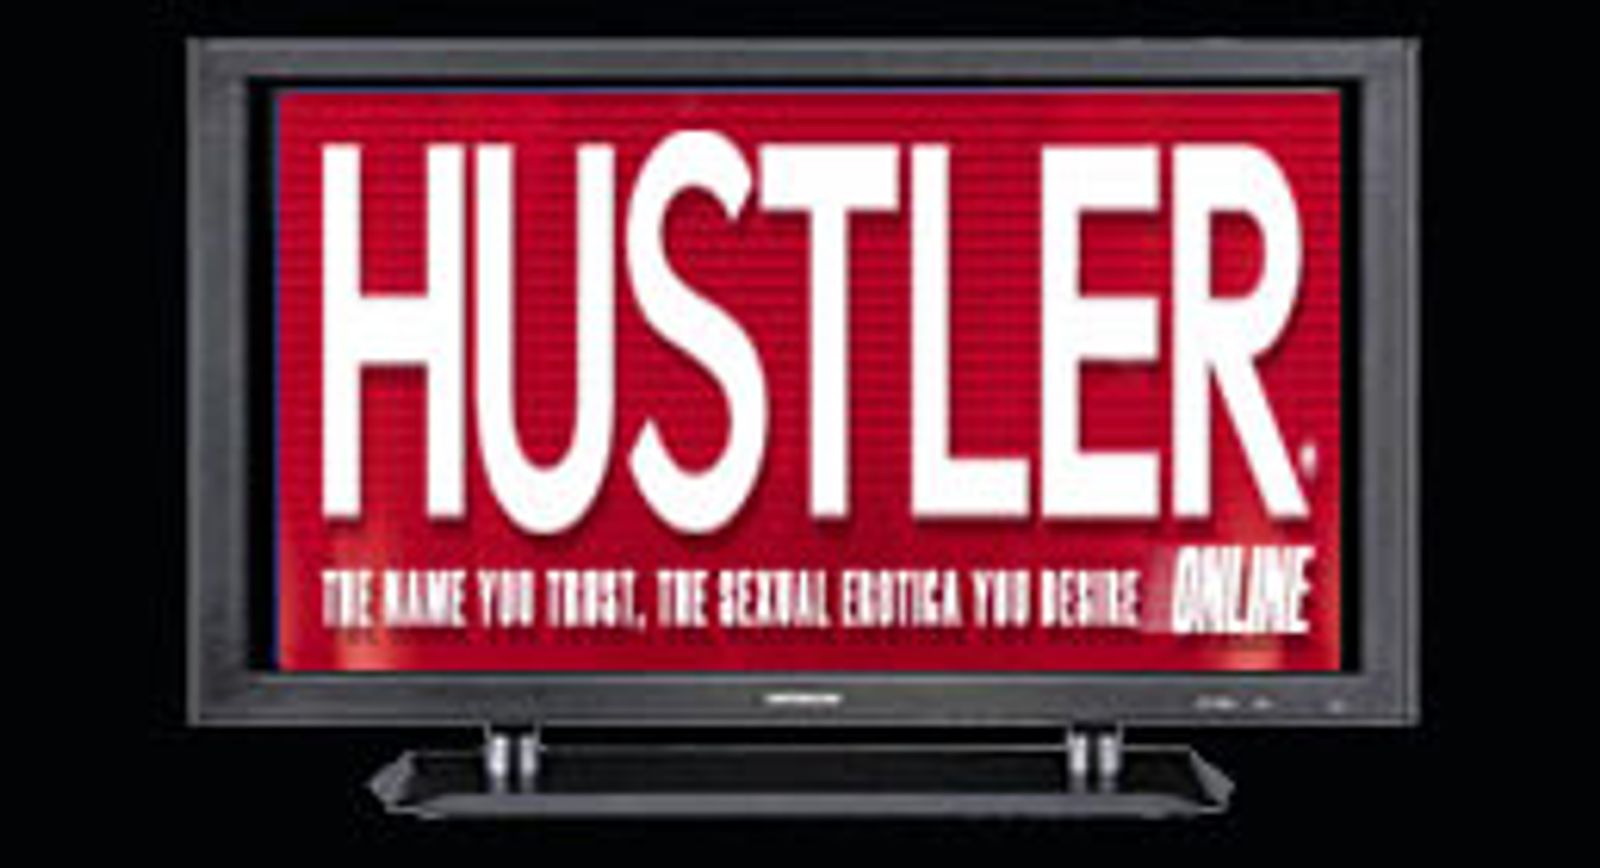 Hustler Branded Cable Channel Launched in Canada